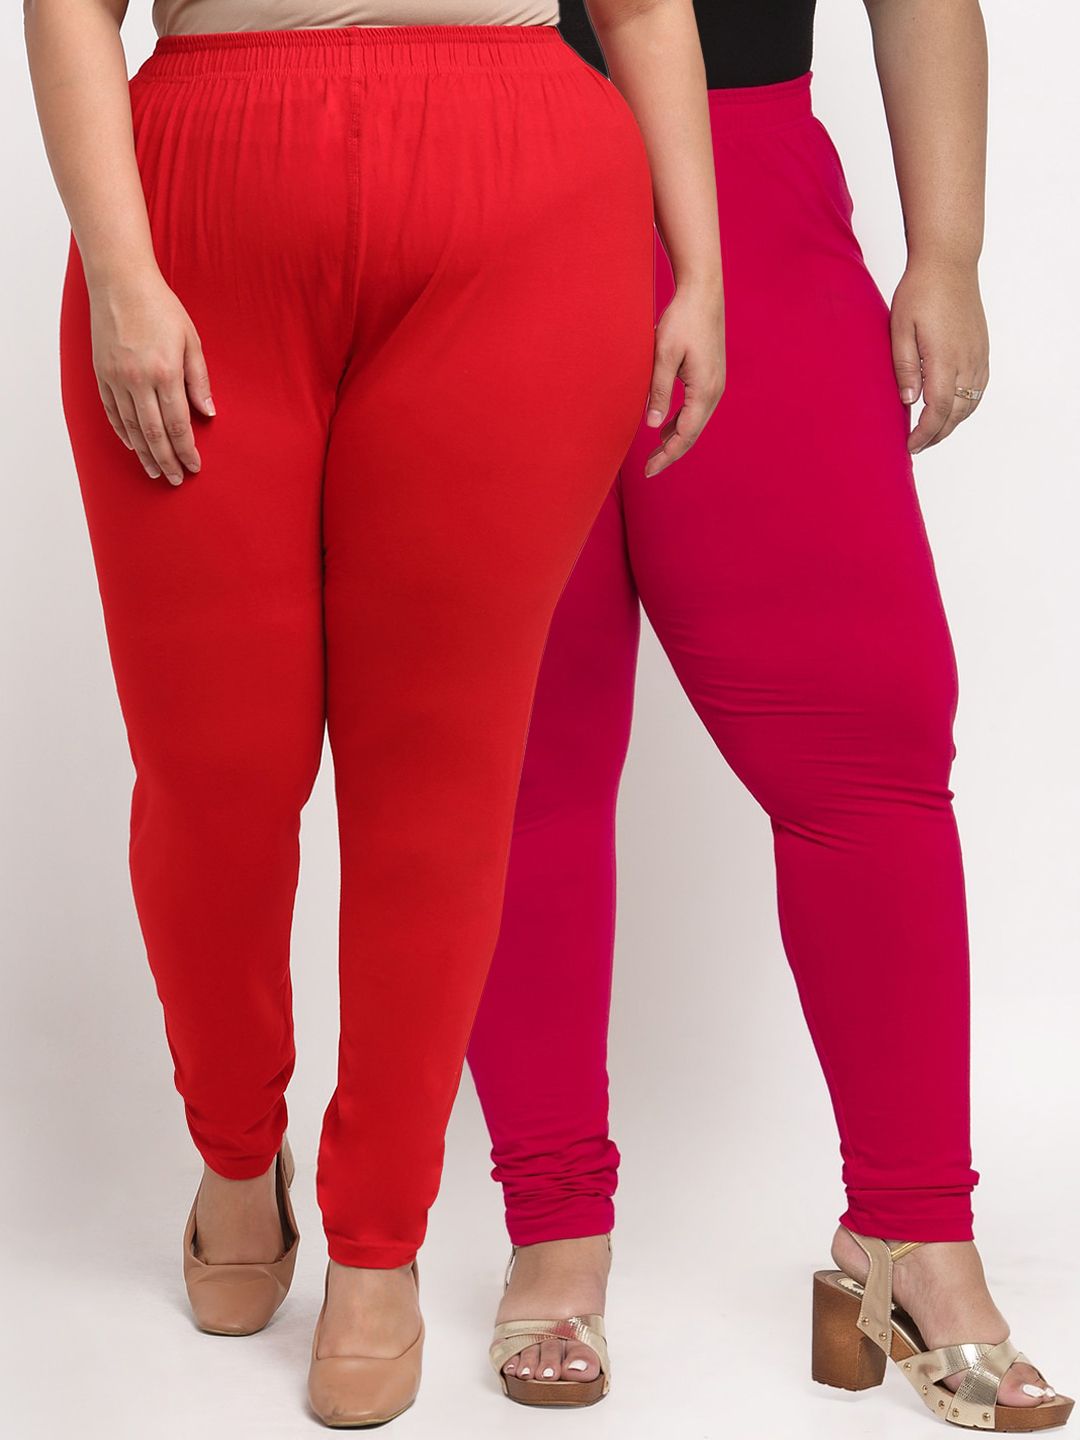 TAG 7 PLUS Women Pack Of 2 Solid Plus Size Leggings Price in India